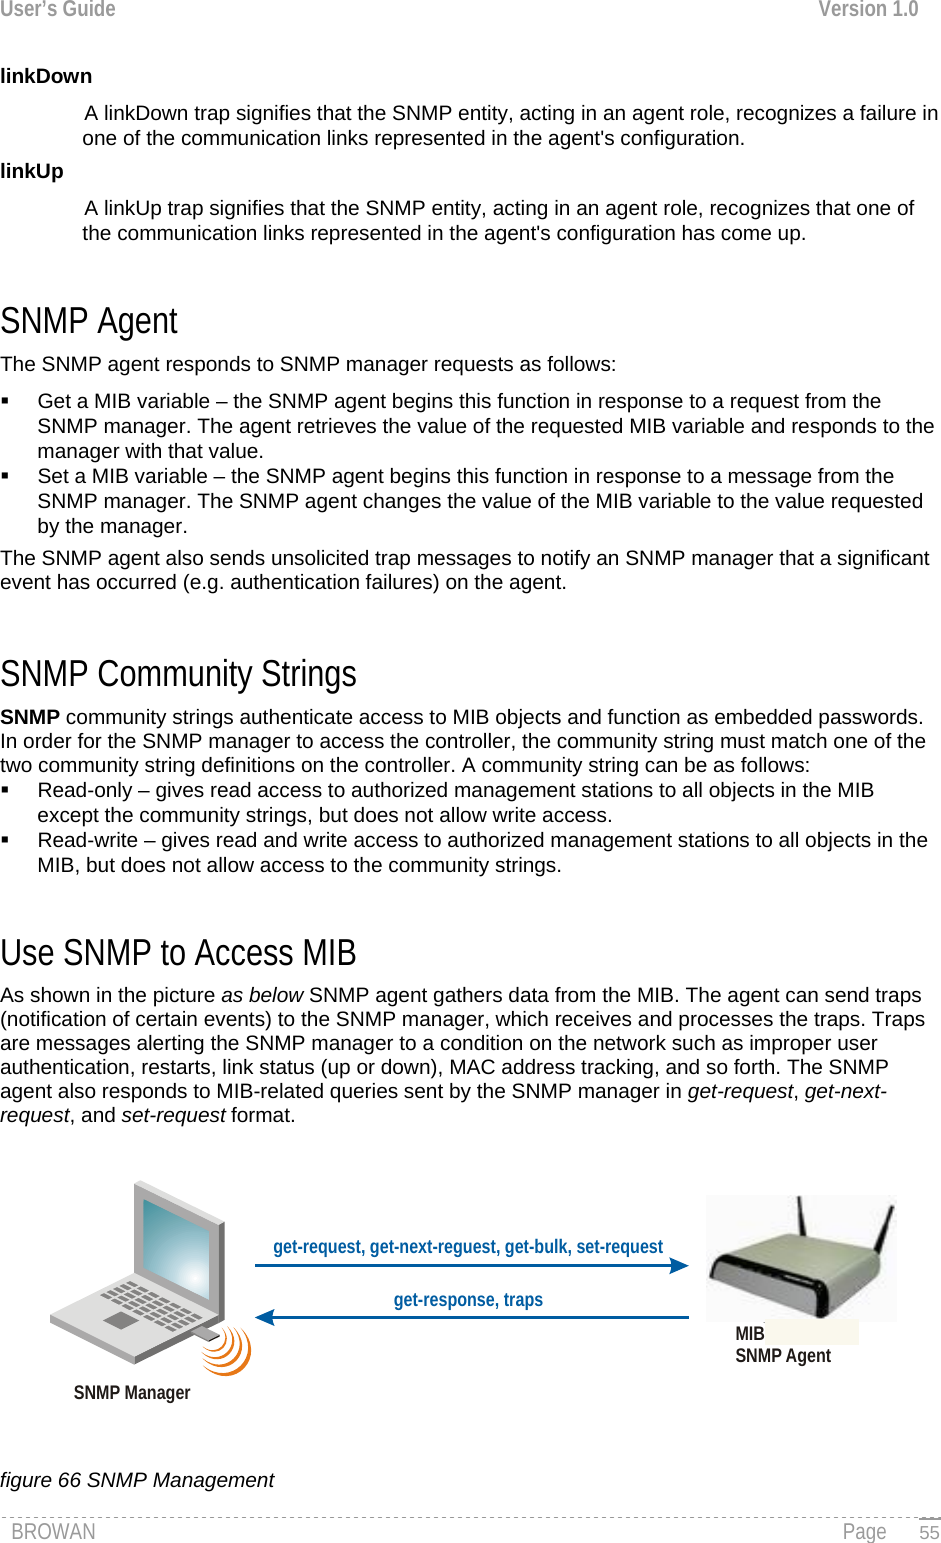 User’s Guide  Version 1.0  linkDown A linkDown trap signifies that the SNMP entity, acting in an agent role, recognizes a failure in one of the communication links represented in the agent&apos;s configuration. linkUp A linkUp trap signifies that the SNMP entity, acting in an agent role, recognizes that one of the communication links represented in the agent&apos;s configuration has come up.  SNMP Agent The SNMP agent responds to SNMP manager requests as follows:   Get a MIB variable – the SNMP agent begins this function in response to a request from the SNMP manager. The agent retrieves the value of the requested MIB variable and responds to the manager with that value.   Set a MIB variable – the SNMP agent begins this function in response to a message from the SNMP manager. The SNMP agent changes the value of the MIB variable to the value requested by the manager. The SNMP agent also sends unsolicited trap messages to notify an SNMP manager that a significant event has occurred (e.g. authentication failures) on the agent.  SNMP Community Strings SNMP community strings authenticate access to MIB objects and function as embedded passwords. In order for the SNMP manager to access the controller, the community string must match one of the two community string definitions on the controller. A community string can be as follows:   Read-only – gives read access to authorized management stations to all objects in the MIB except the community strings, but does not allow write access.   Read-write – gives read and write access to authorized management stations to all objects in the MIB, but does not allow access to the community strings.  Use SNMP to Access MIB As shown in the picture as below SNMP agent gathers data from the MIB. The agent can send traps (notification of certain events) to the SNMP manager, which receives and processes the traps. Traps are messages alerting the SNMP manager to a condition on the network such as improper user authentication, restarts, link status (up or down), MAC address tracking, and so forth. The SNMP agent also responds to MIB-related queries sent by the SNMP manager in get-request, get-next-request, and set-request format. MIBSNMP AgentP-560SNMP Managerget-response, trapsget-request, get-next-reguest, get-bulk, set-request + figure 66 SNMP Management BROWAN                                                                                                                                               Page   55